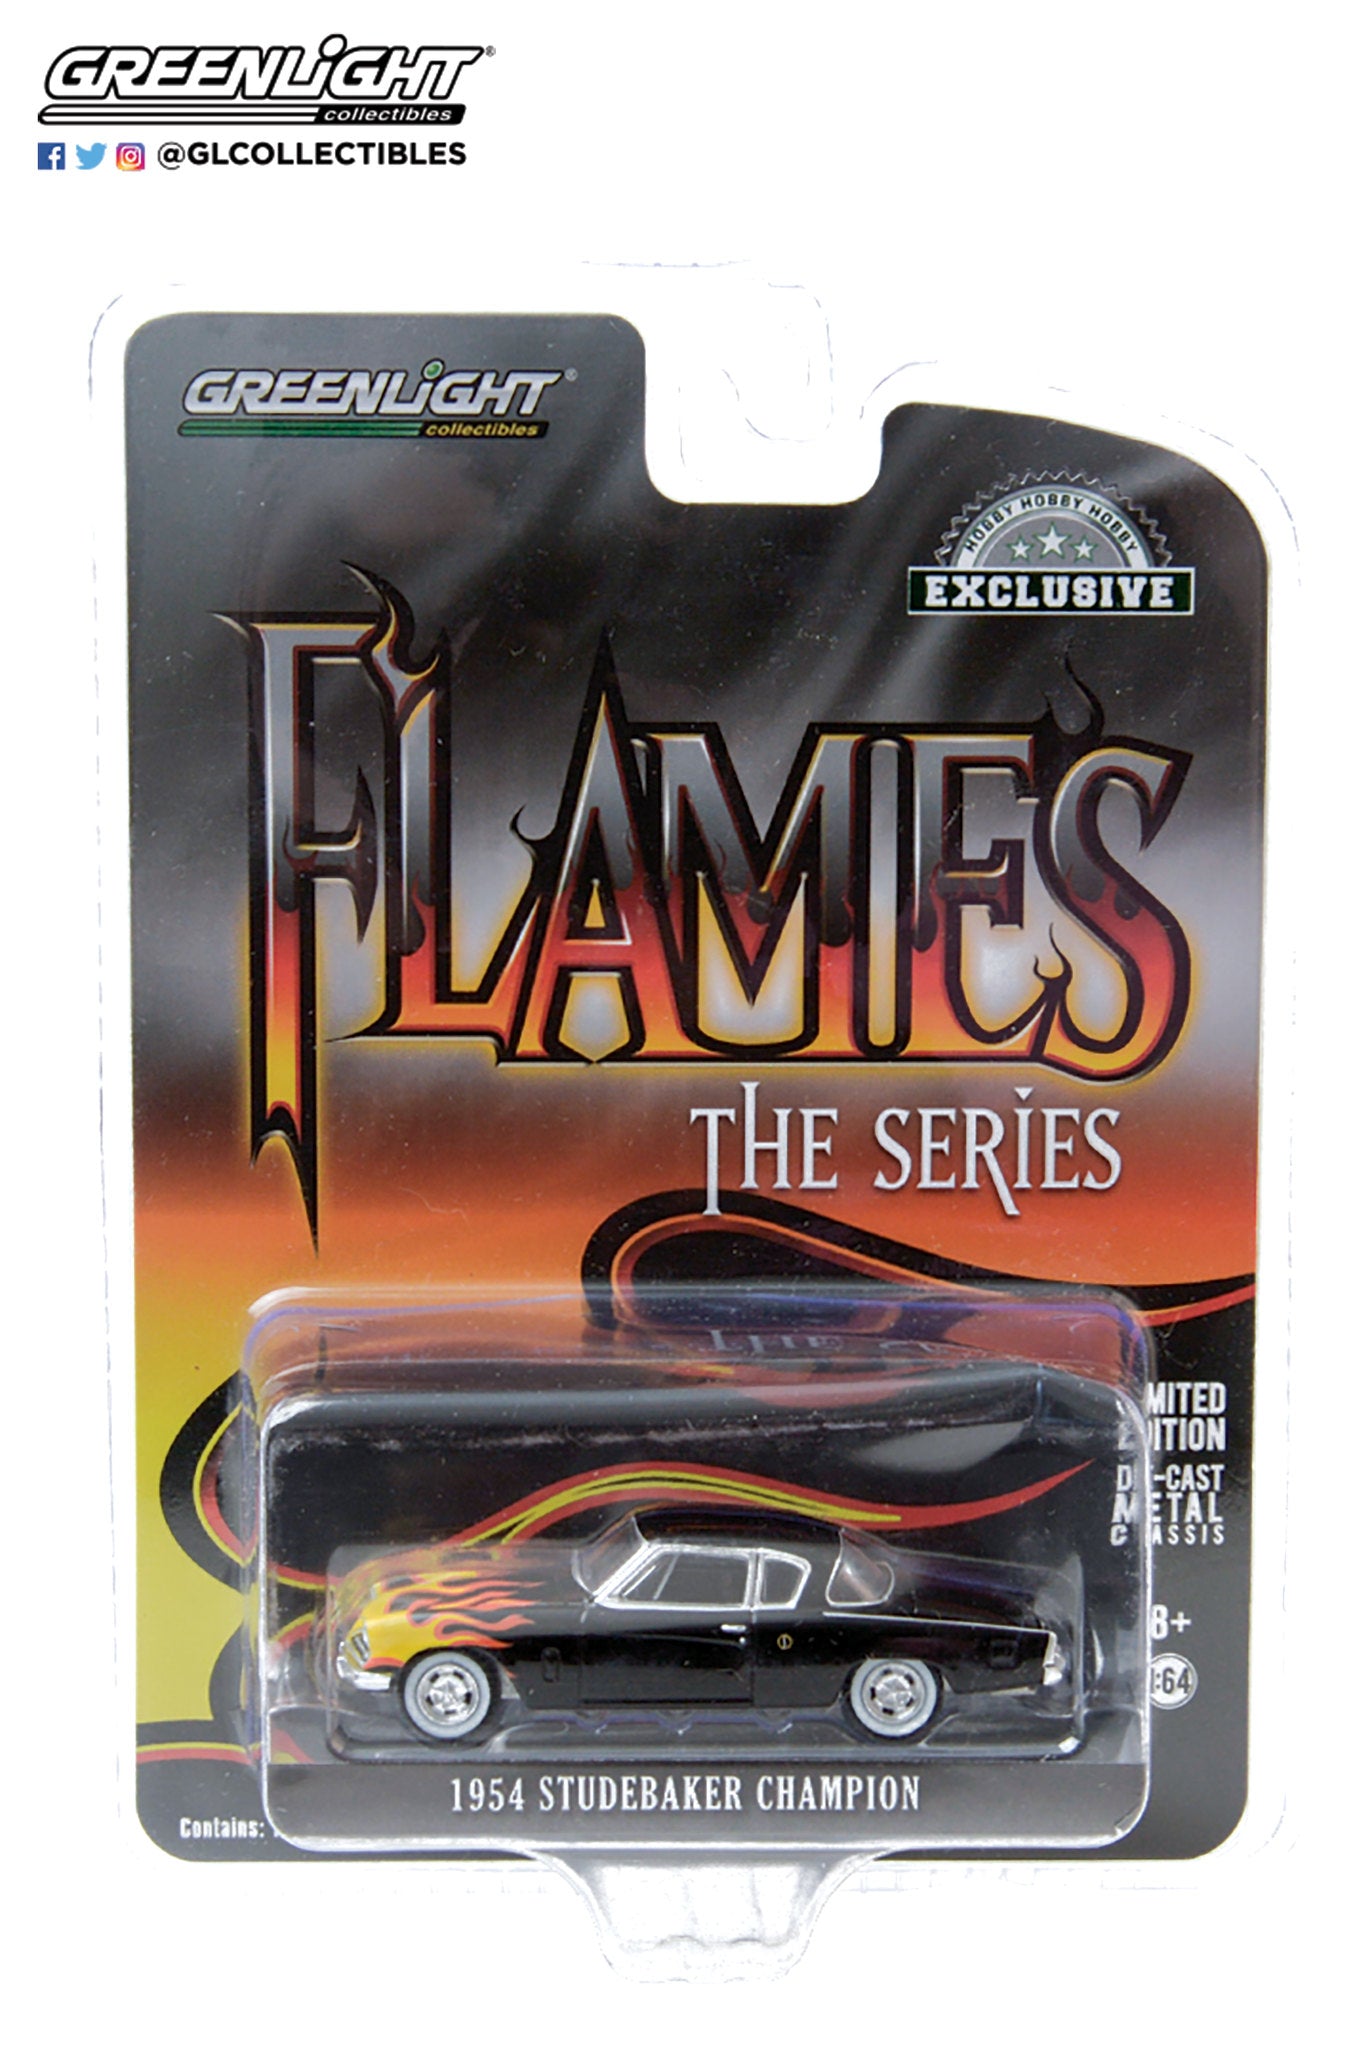 GreenLight 1:64 Flames The Series - 1954 Studebaker Champion - Black with Flames 30116